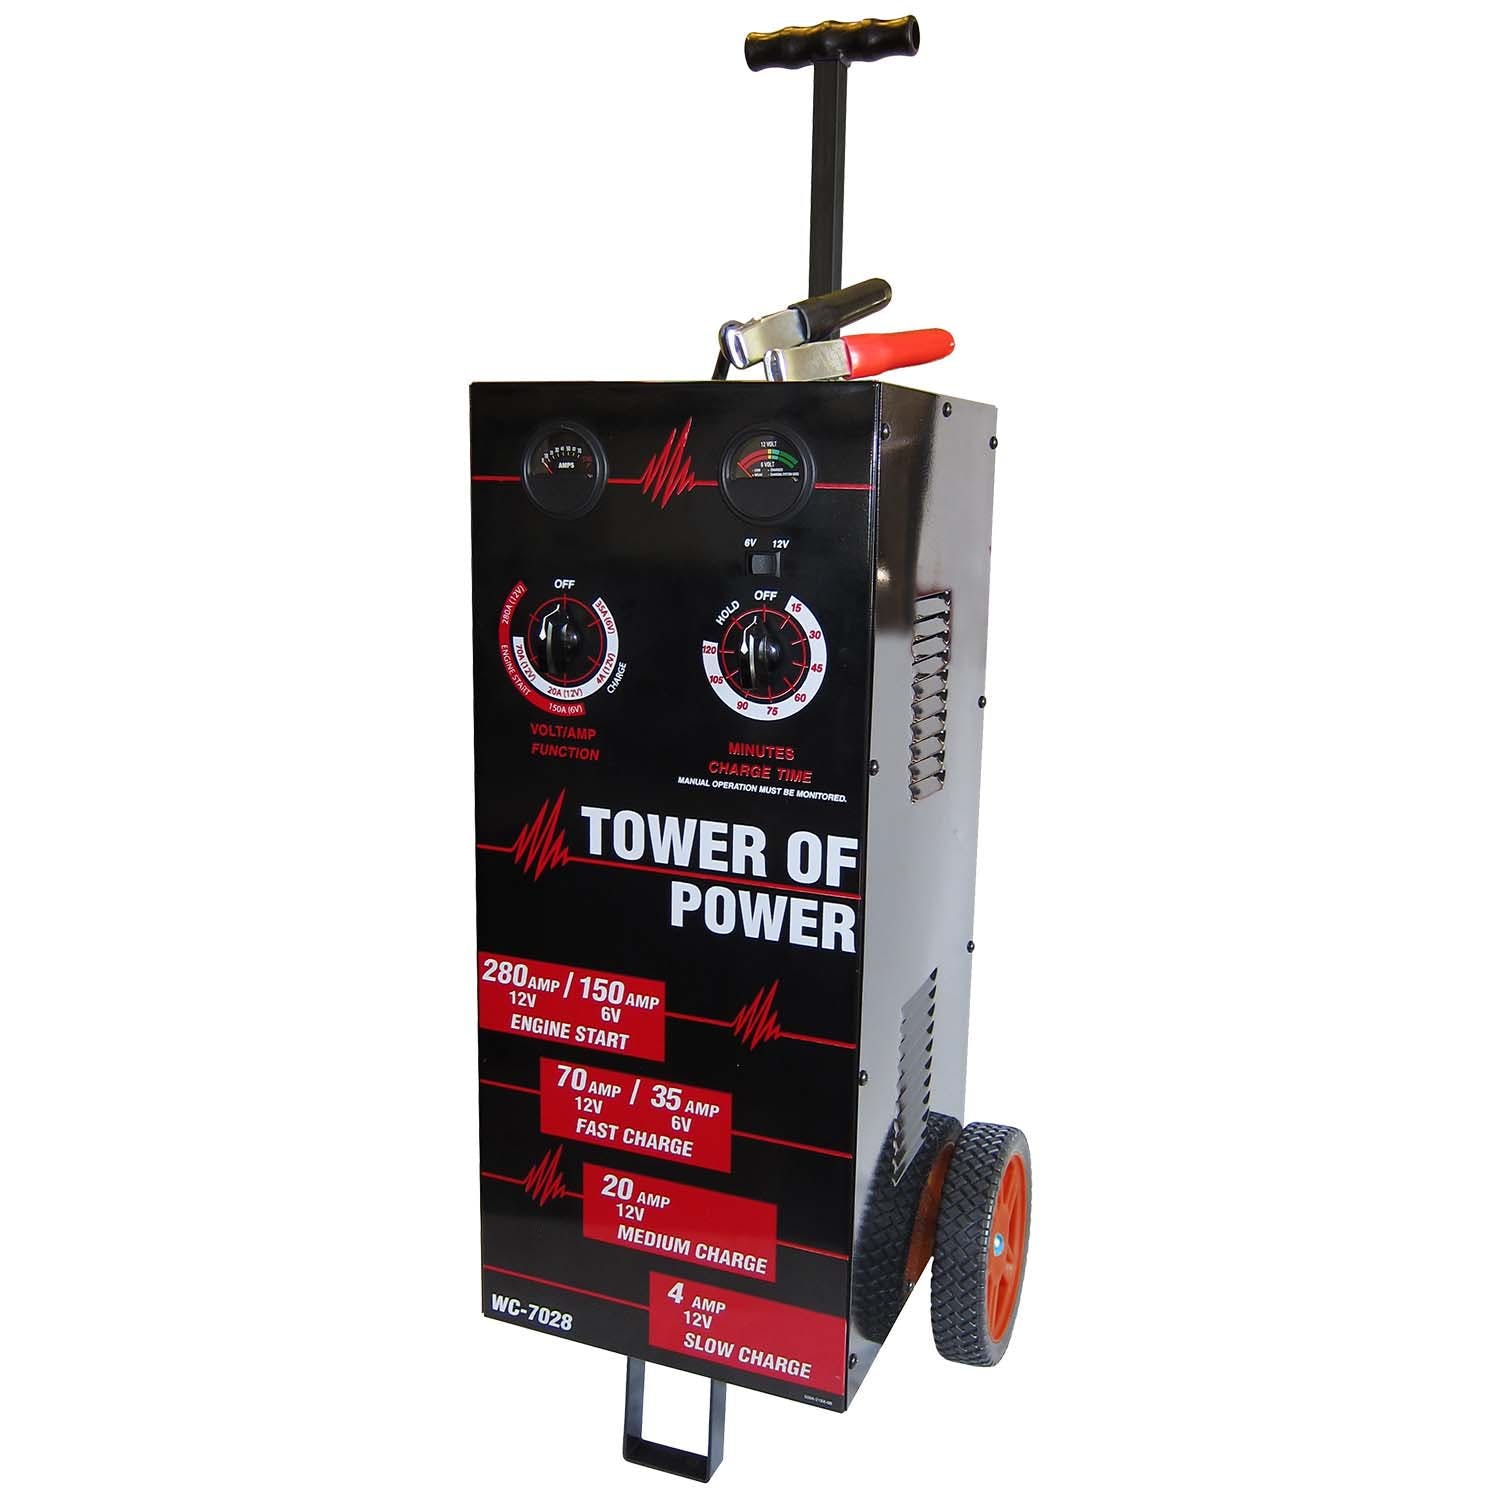 AutoMeter Products WC-7028 Tower OF Power Wheel Charger